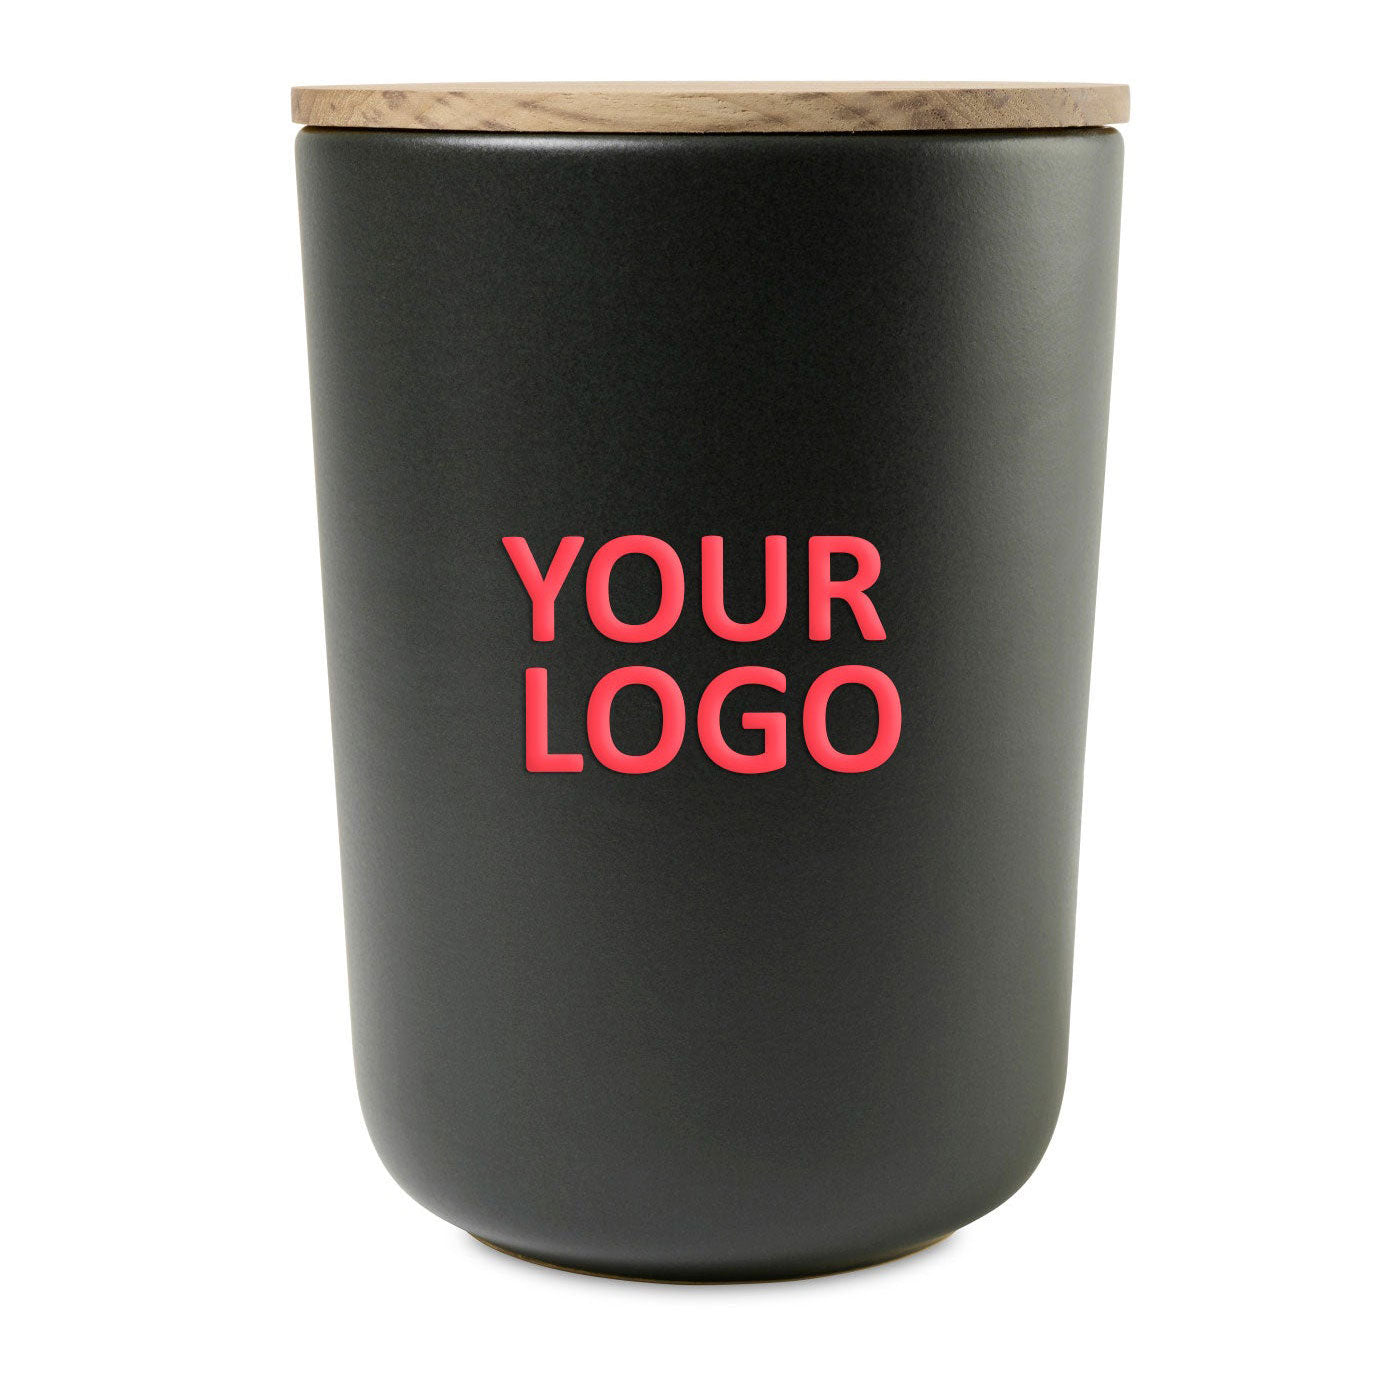 Be Home Stoneware XLarge Custom Containers, Black